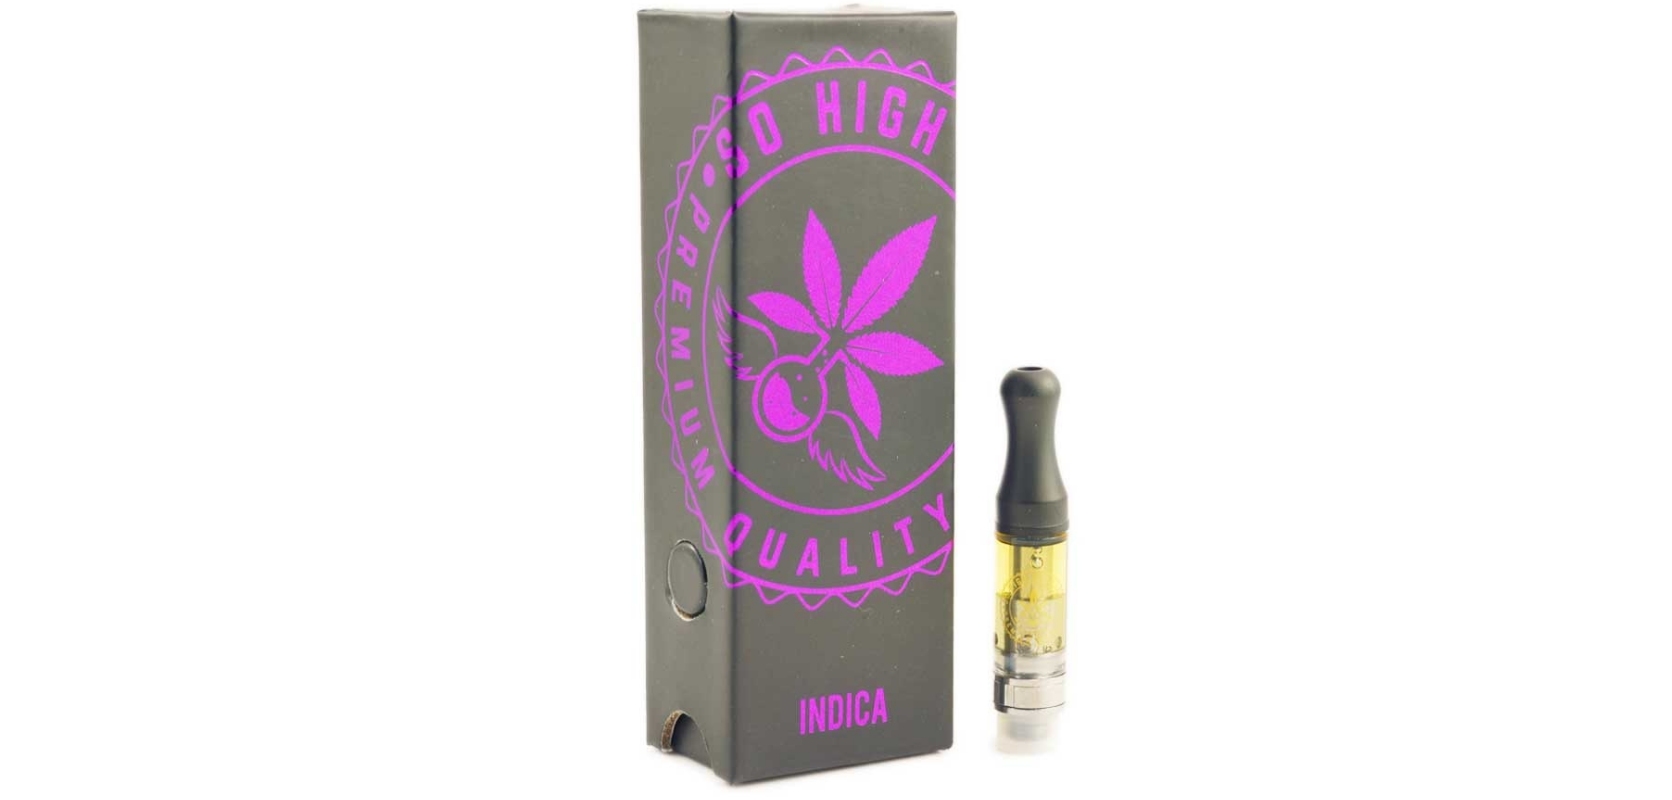 That's incredible, considering that the So High Extracts Premium Vape 0.5ML THC - Blood Orange (Indica) costs only $20 on sale.